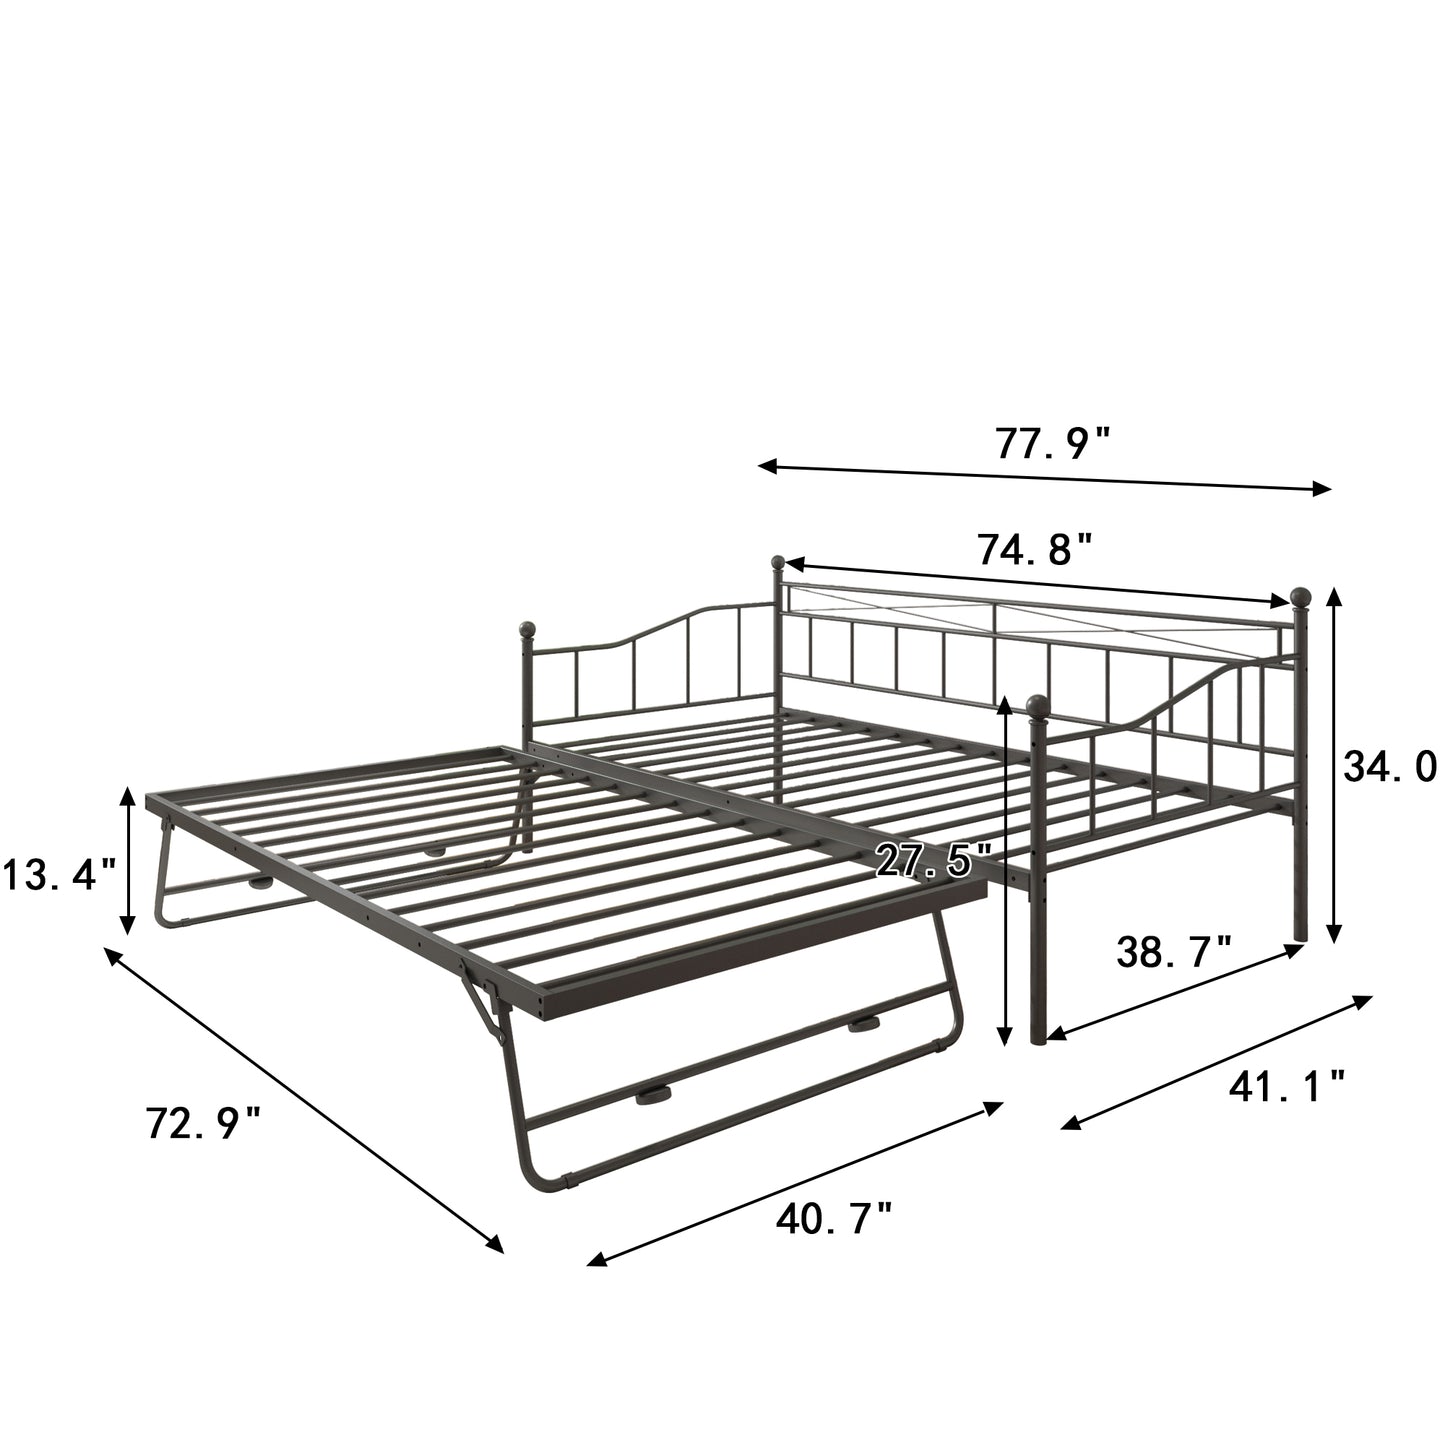 SYNGAR Metal Daybed with Trundle, Modern Home Twin Daybed with Pop Up Trundle for Living Room/Bedroom, Twin Size Sofa Bed W/ Steel Slats Support, Platform Bed Frame No Box Spring Needed, Black, D6606